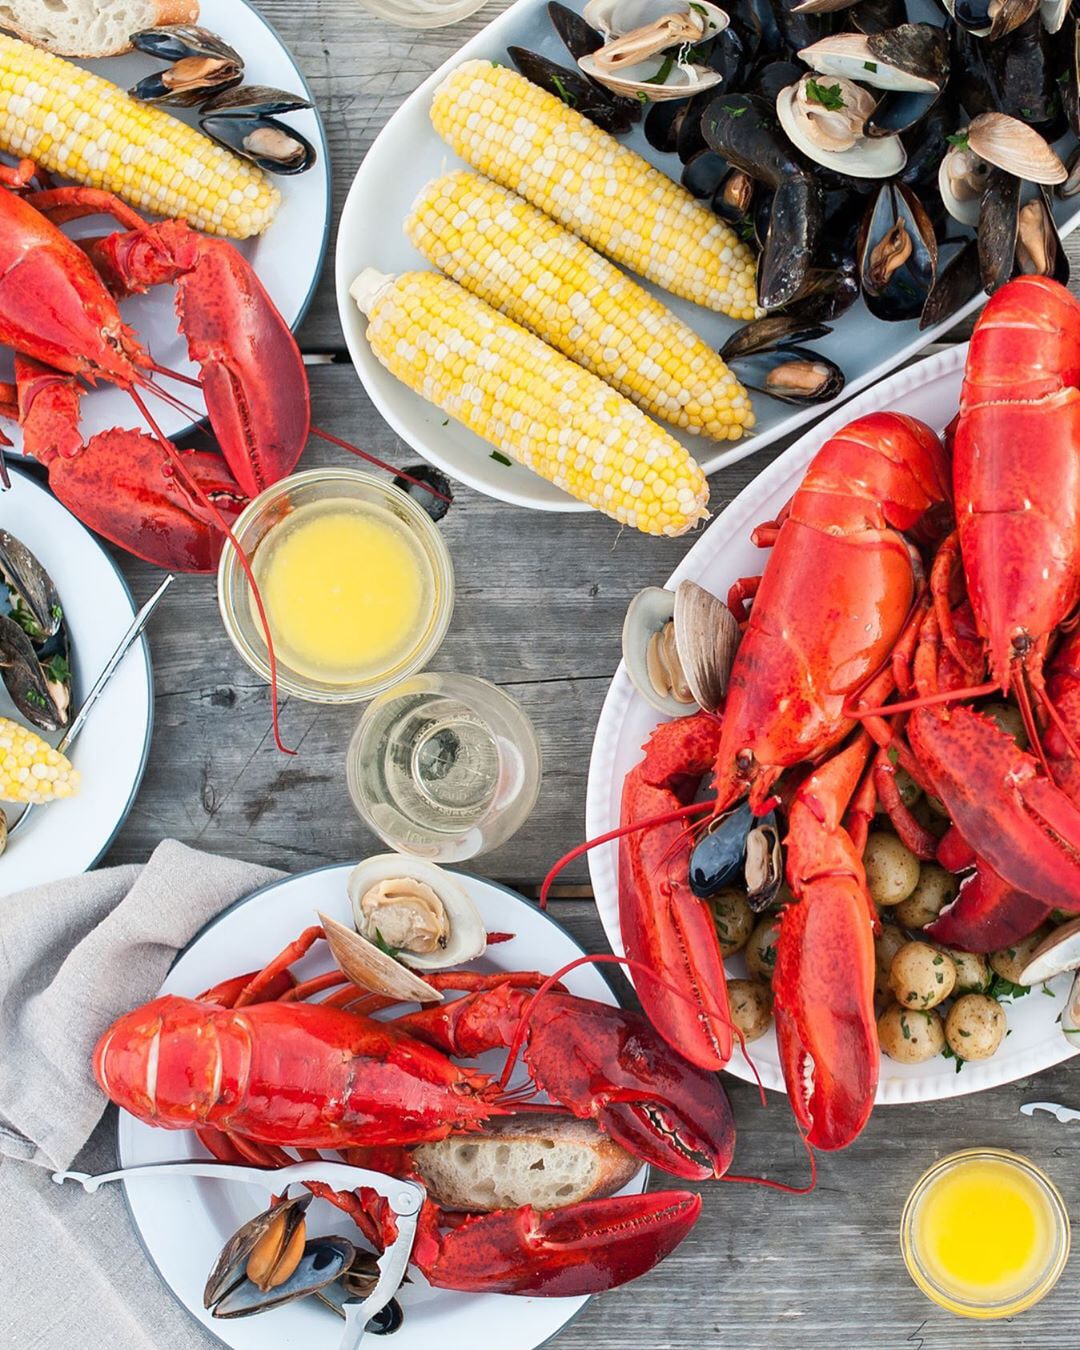 Nova Scotia is home to a diverse range of seafood - of which, the most famous is the Canadian hard-shelled lobster.